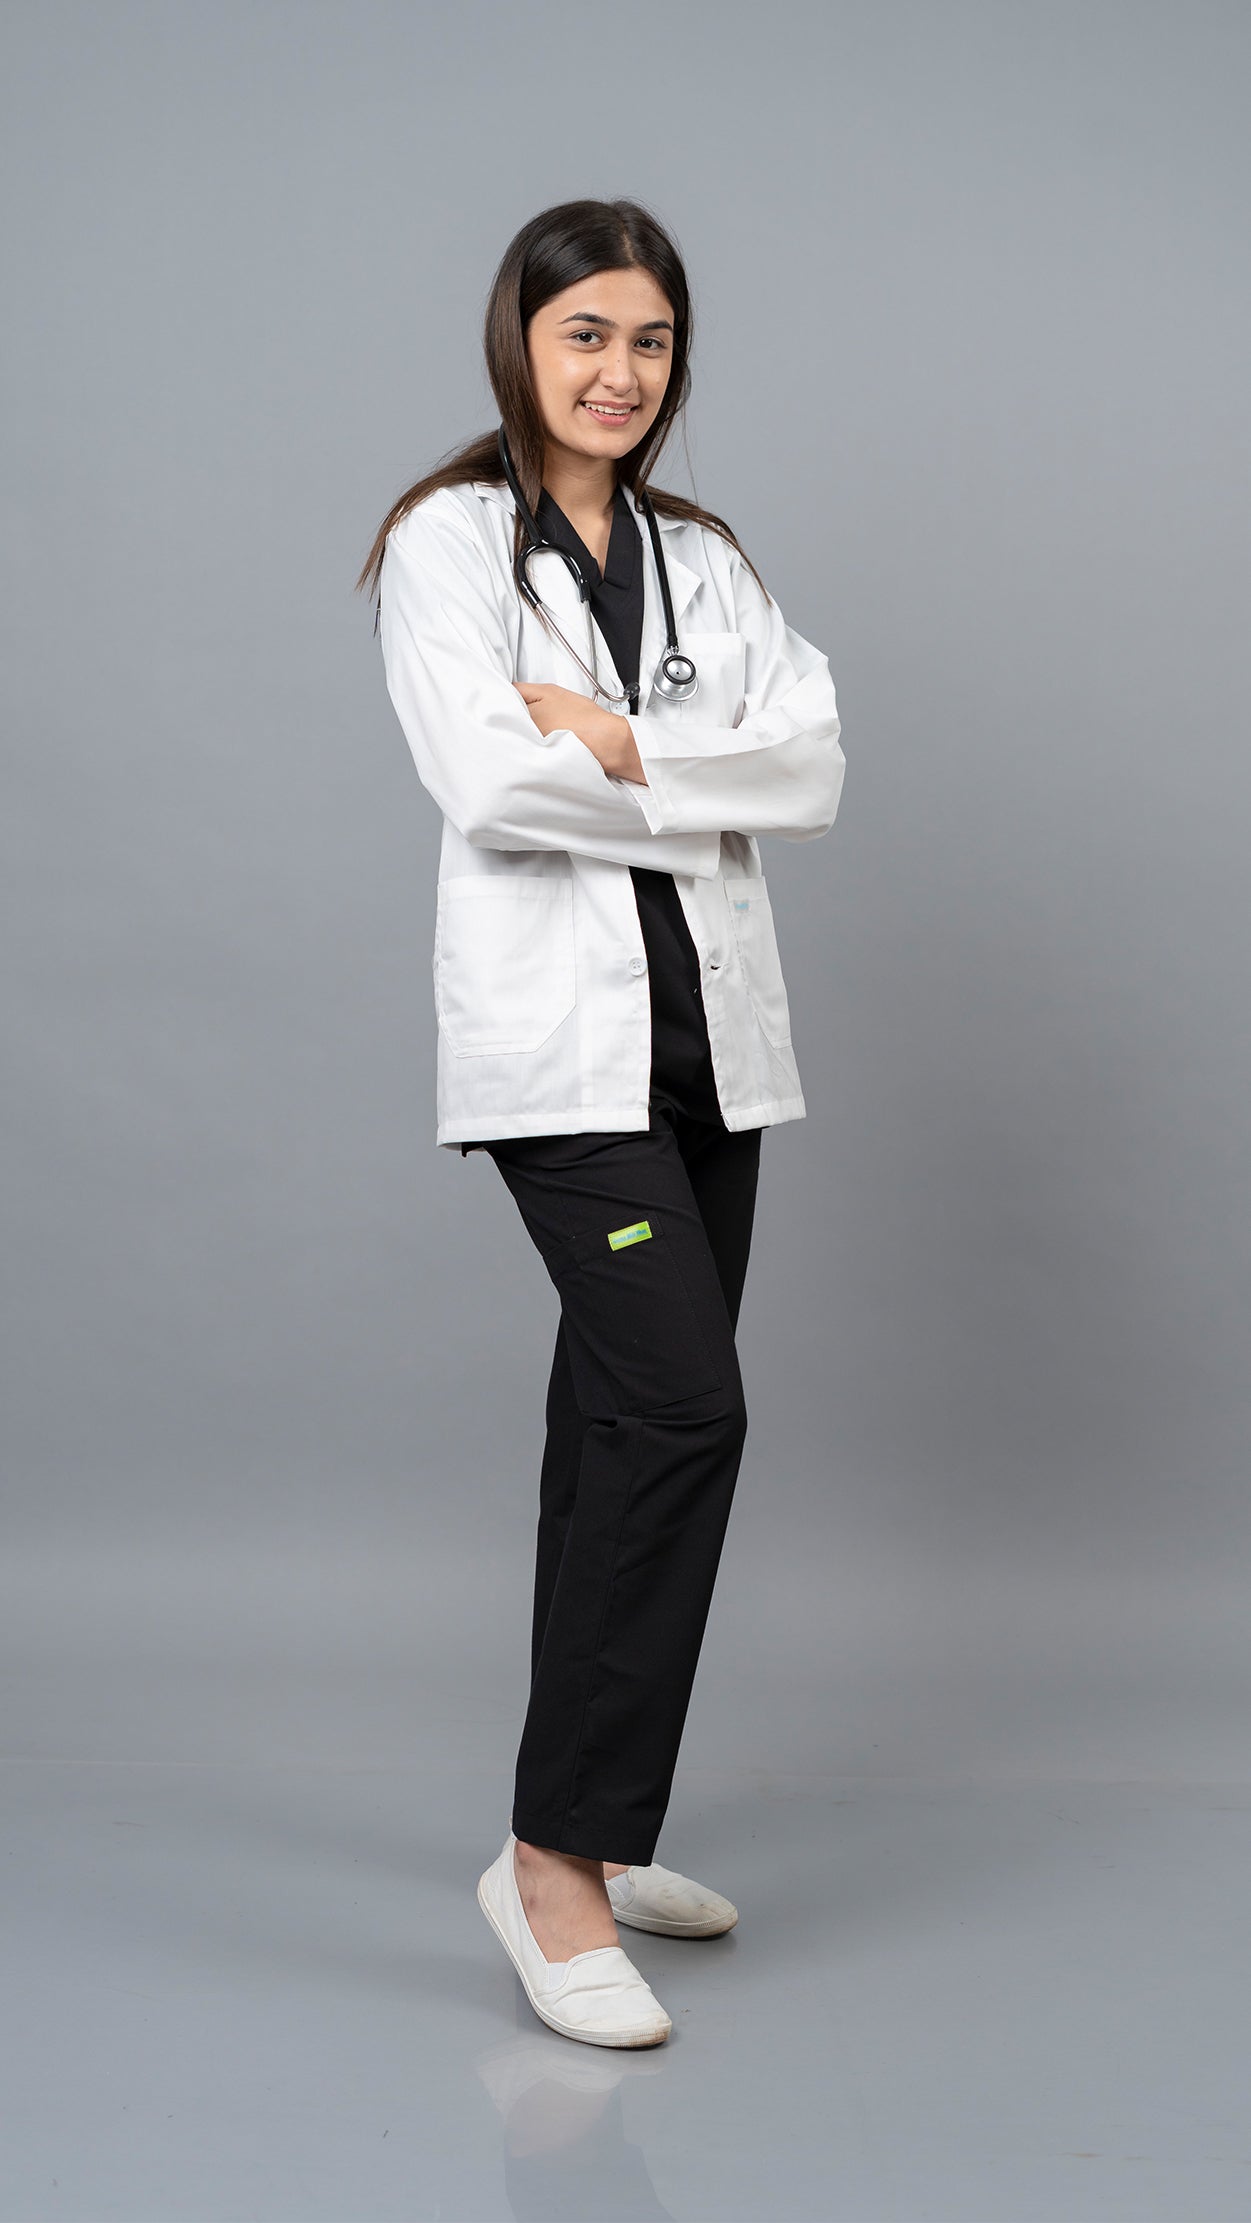 VastraMedwear Full Sleeves Lab Coat/Apron for Chemistry Lab and Medical Students Women